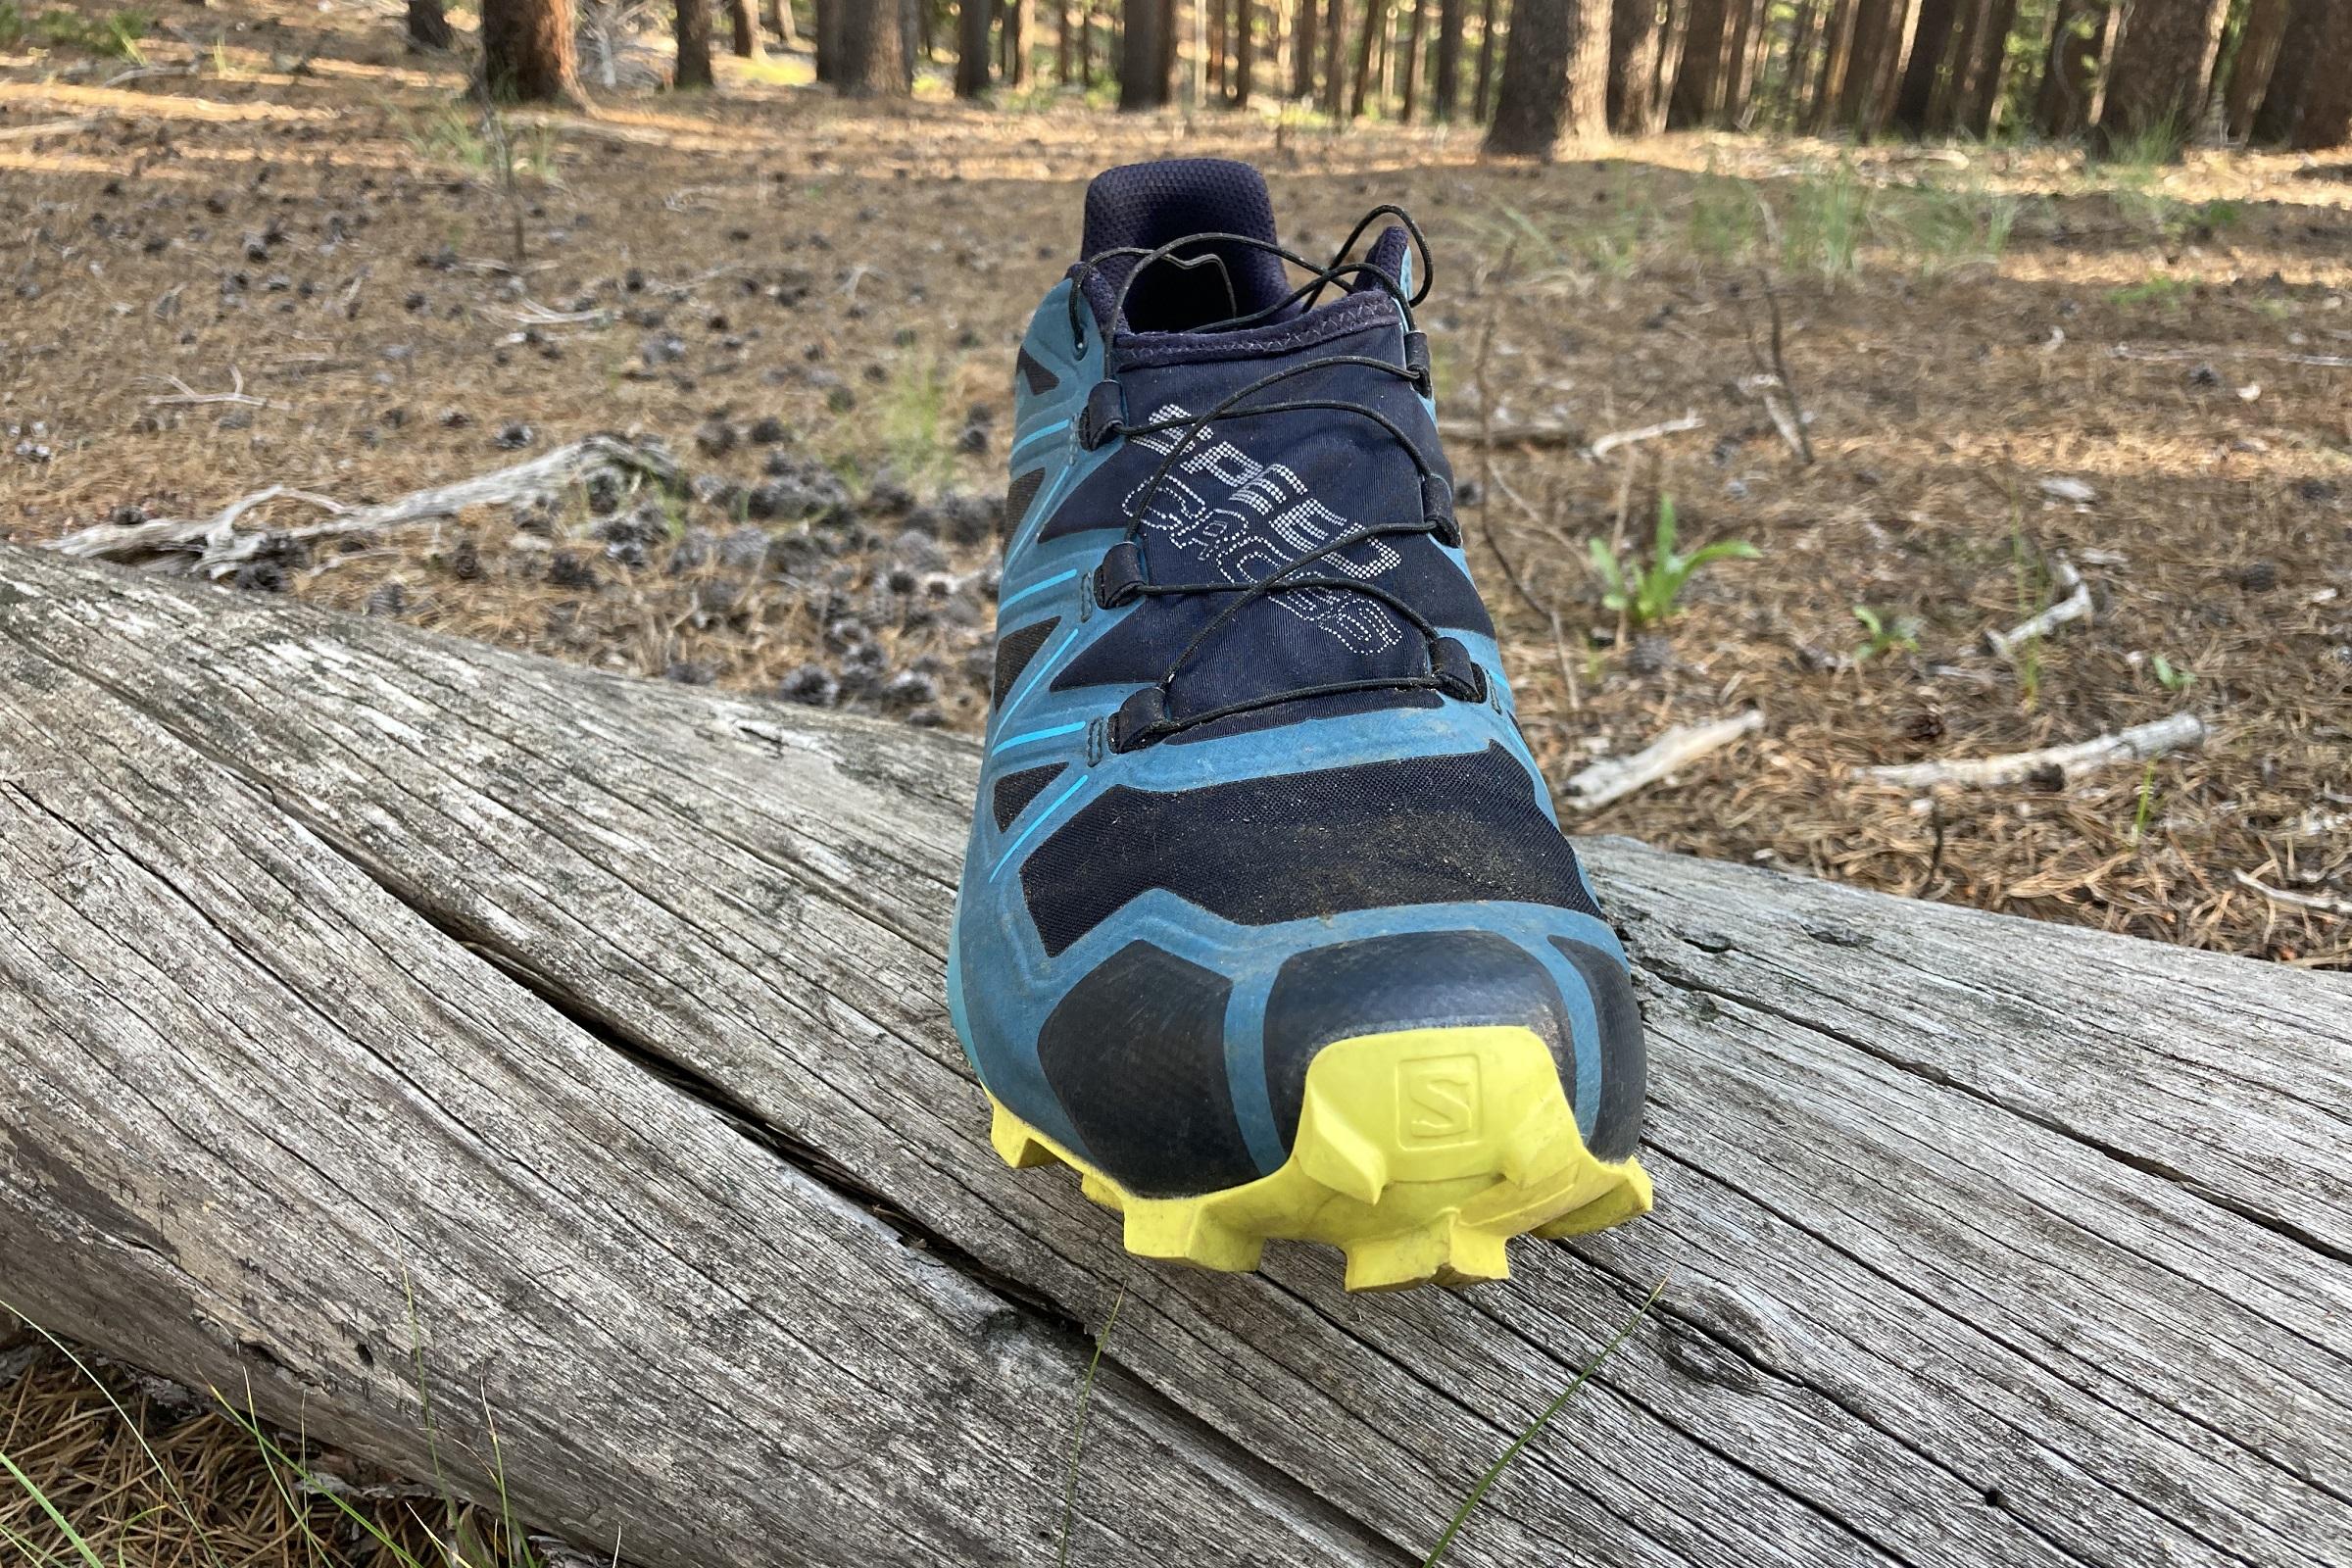 Salomon Speedcross 5 Review - Is This the Trail Shoe for You?